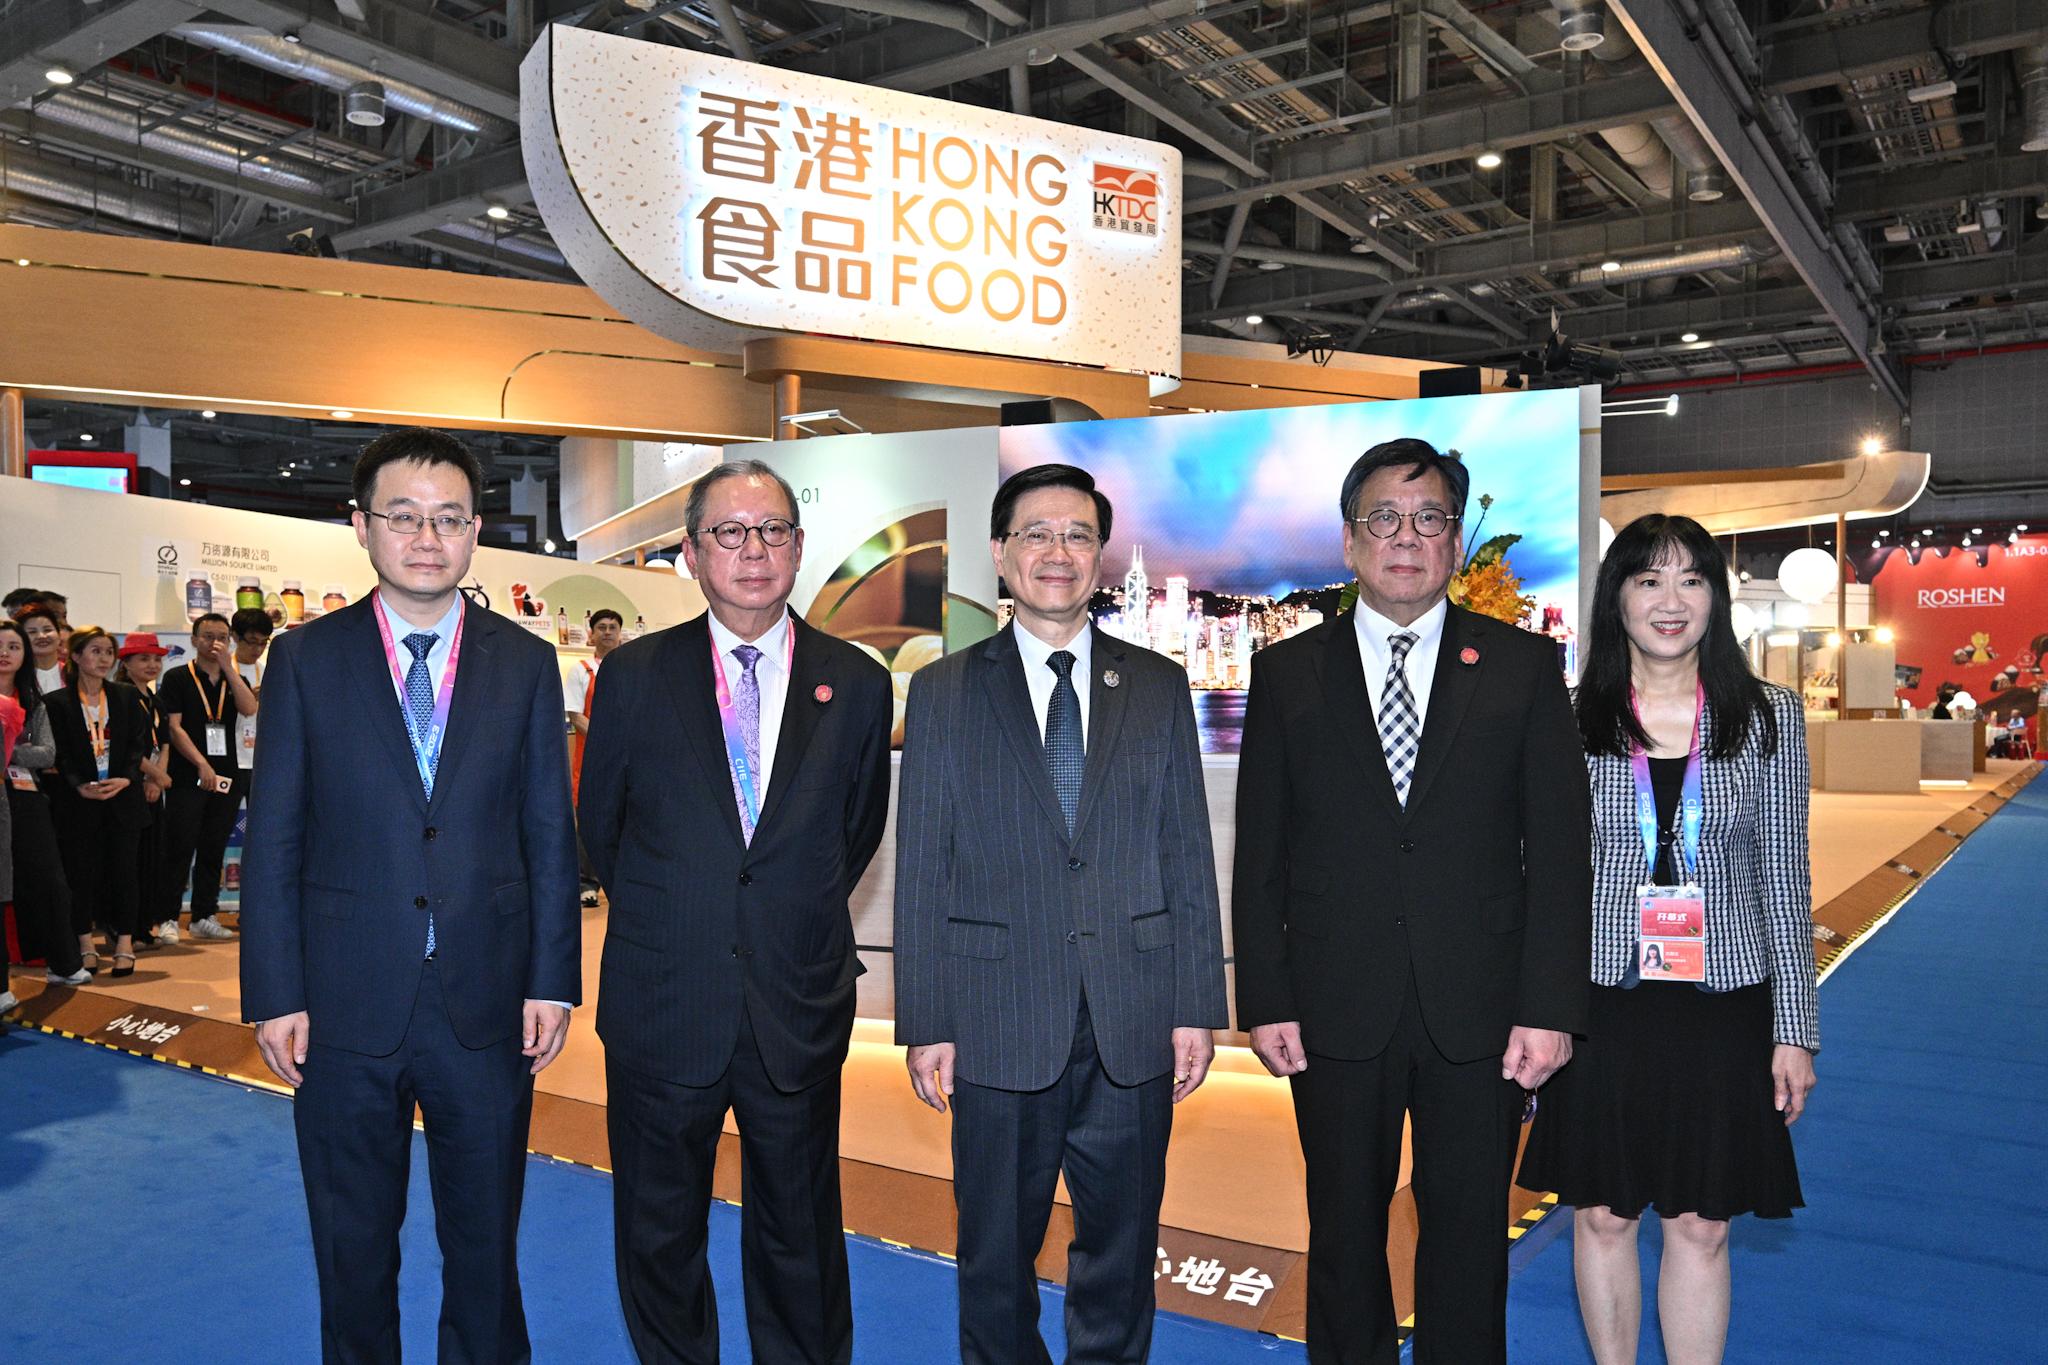 The Chief Executive, Mr John Lee, visited the Hong Kong Exhibition Area of the sixth China International Import Expo in Shanghai today (November 5). Photo shows Mr Lee (centre); the Secretary for Commerce and Economic Development, Mr Algernon Yau (second right); the Chairman of the Hong Kong Trade Development Council (HKTDC), Dr Peter Lam (second left); and the Executive Director of the HKTDC, Ms Margaret Fong (first right), at the Hong Kong Product Pavilion.